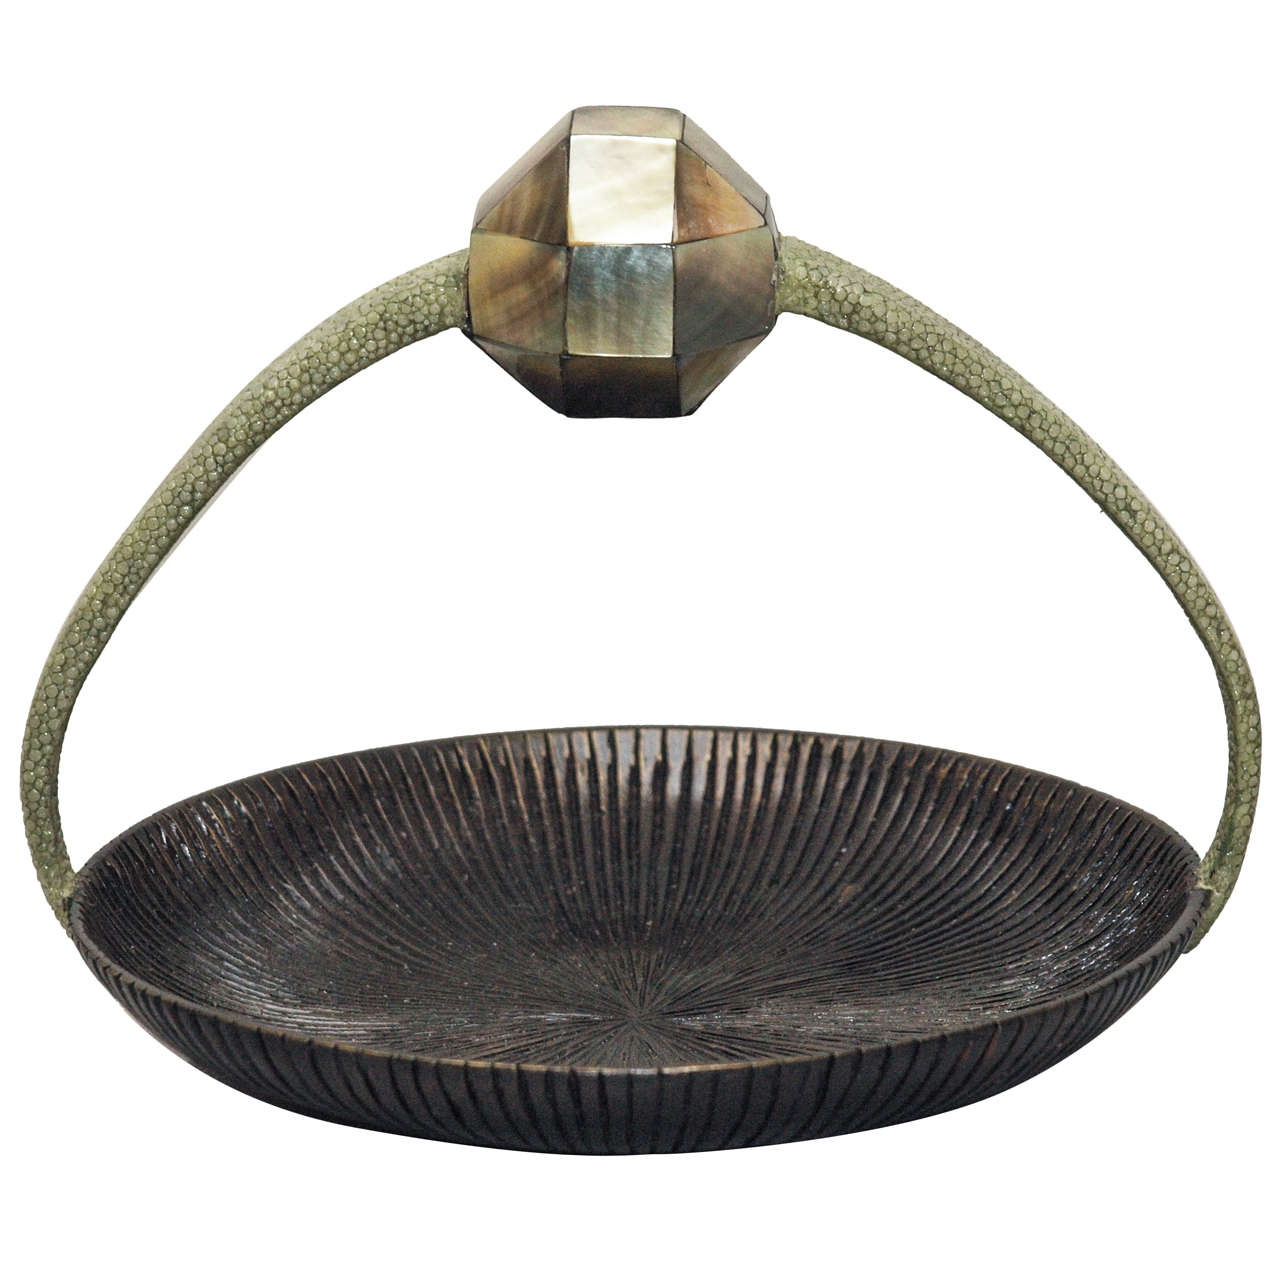 Small Bronze Vessel with Shagreen Handle, by R&Y Augousti, Paris